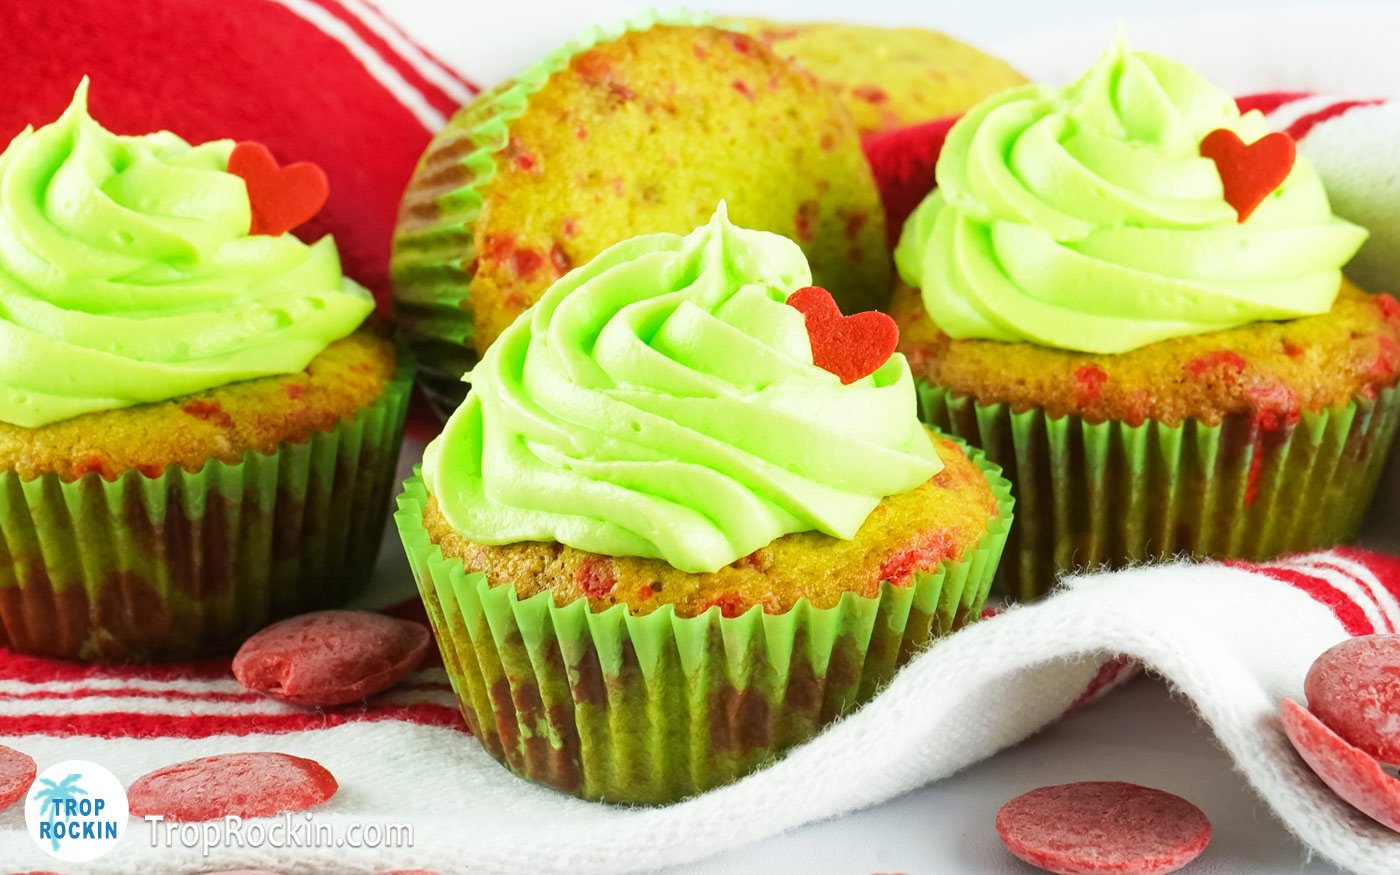 Grinch Cupcakes (with Surprise Baked In)